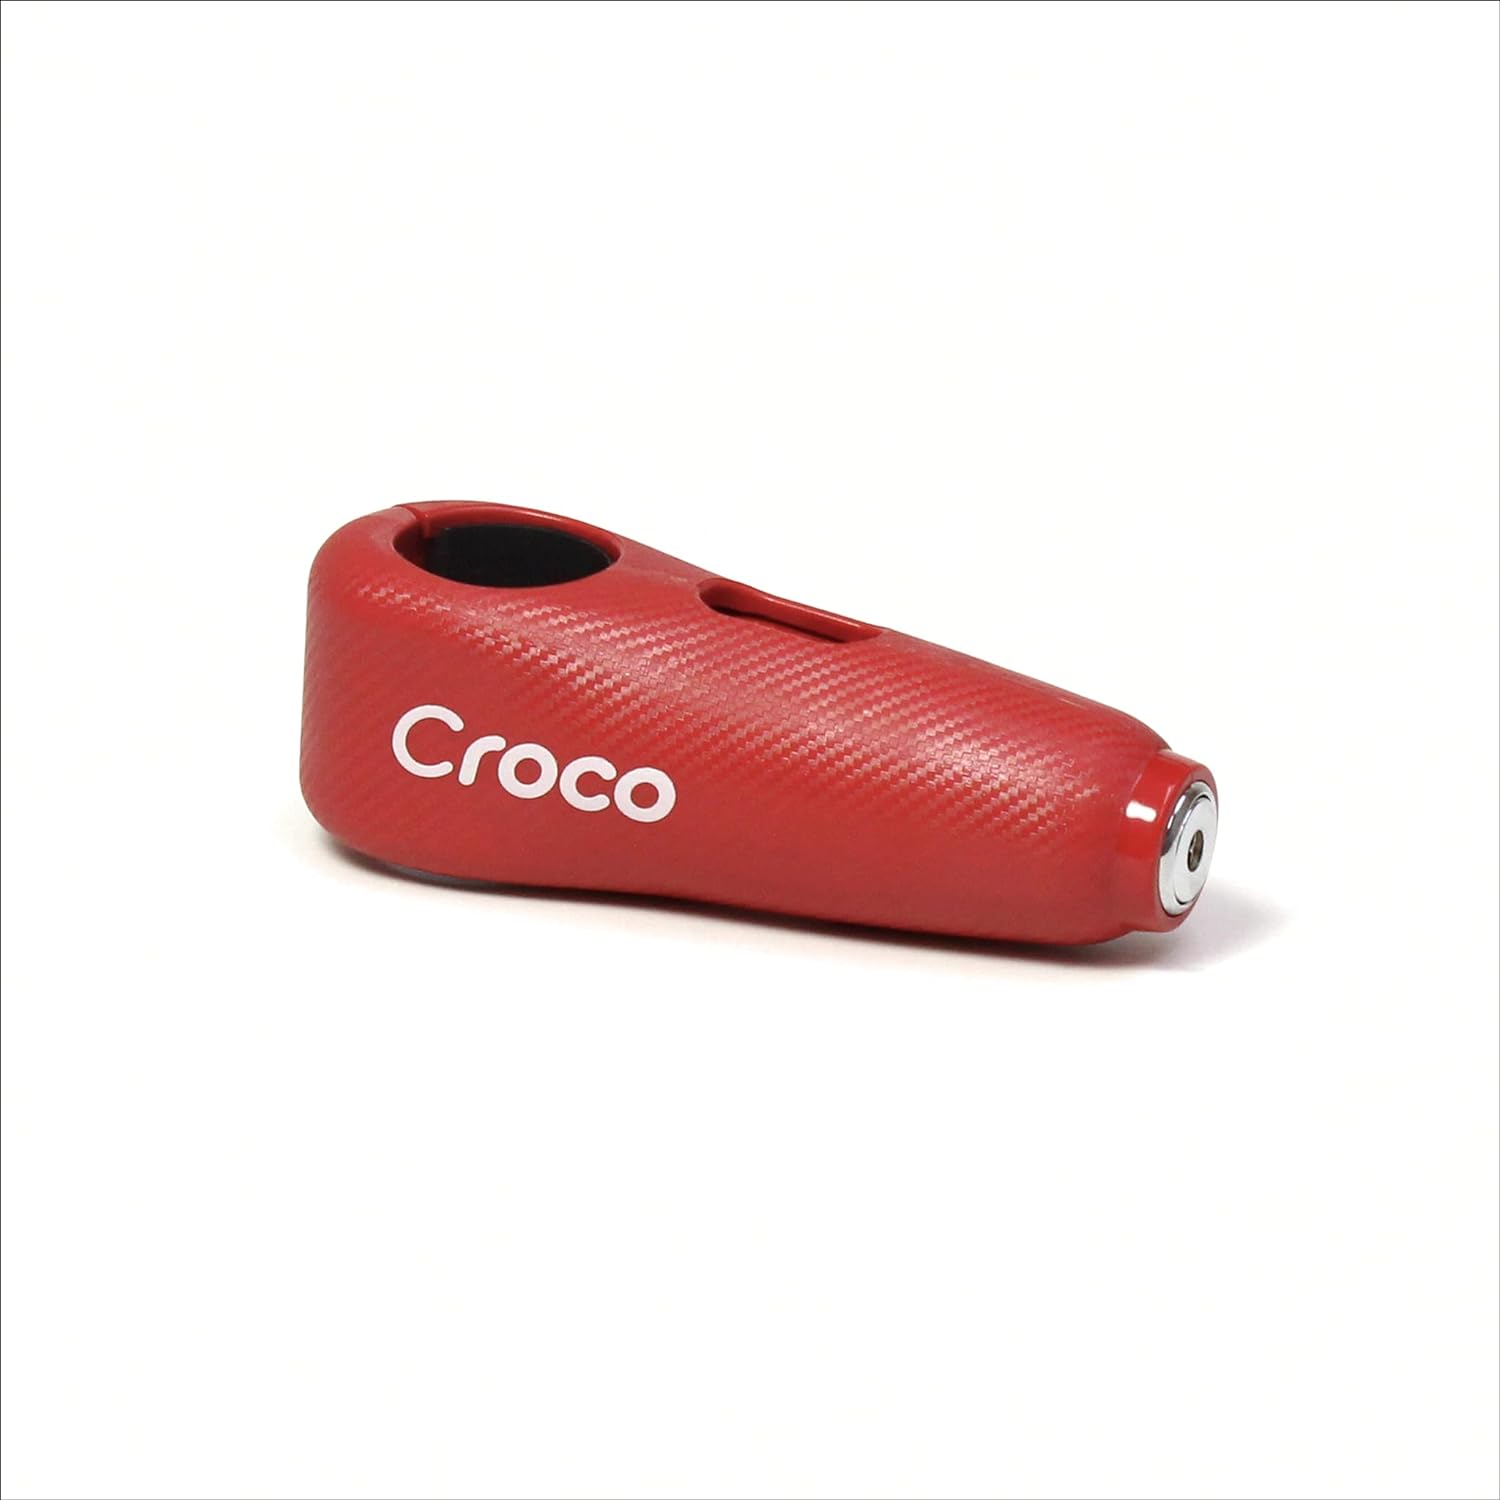 The image shows a close-up view of a red Croco lock with a carbon fiber-like texture on its surface. The lock appears robust and is branded with the Croco logo in white letters, suggesting a focus on strong visual branding. The keyhole is at one end of the lock, hinting at a high-security cylinder mechanism. The design is sleek and modern, and the overall impression is that of a sturdy, reliable lock for securing valuable items